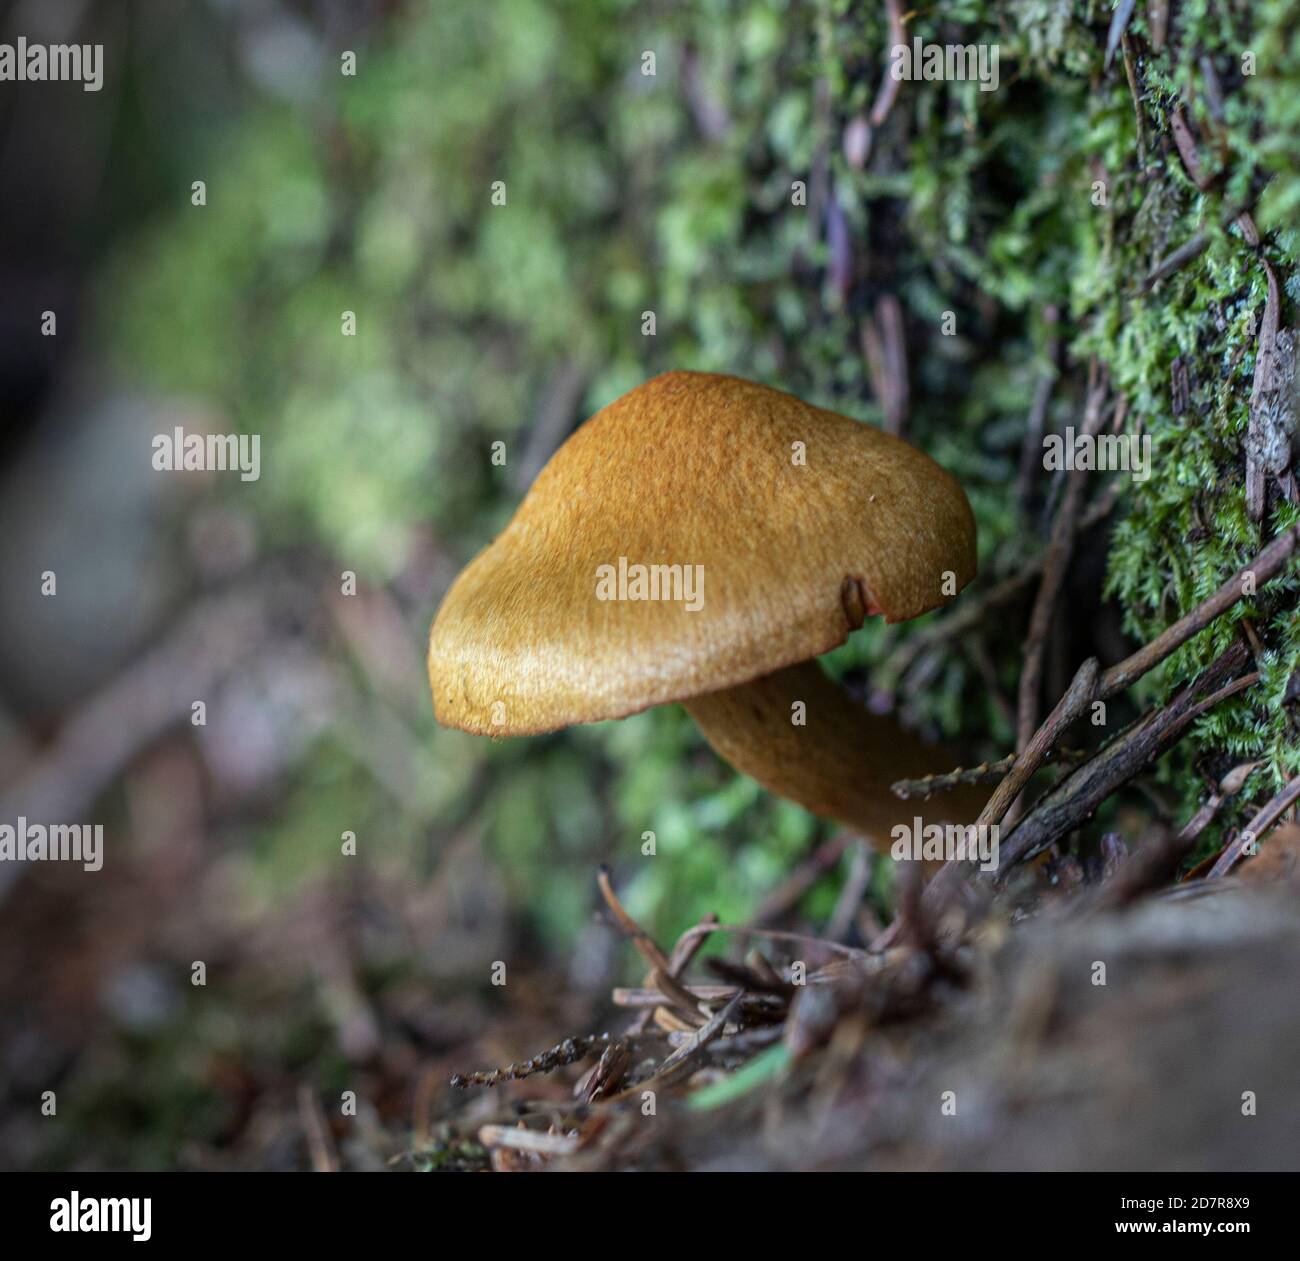 Cortinarius sp. mushroom on a green mossy surface in the forest Stock Photo